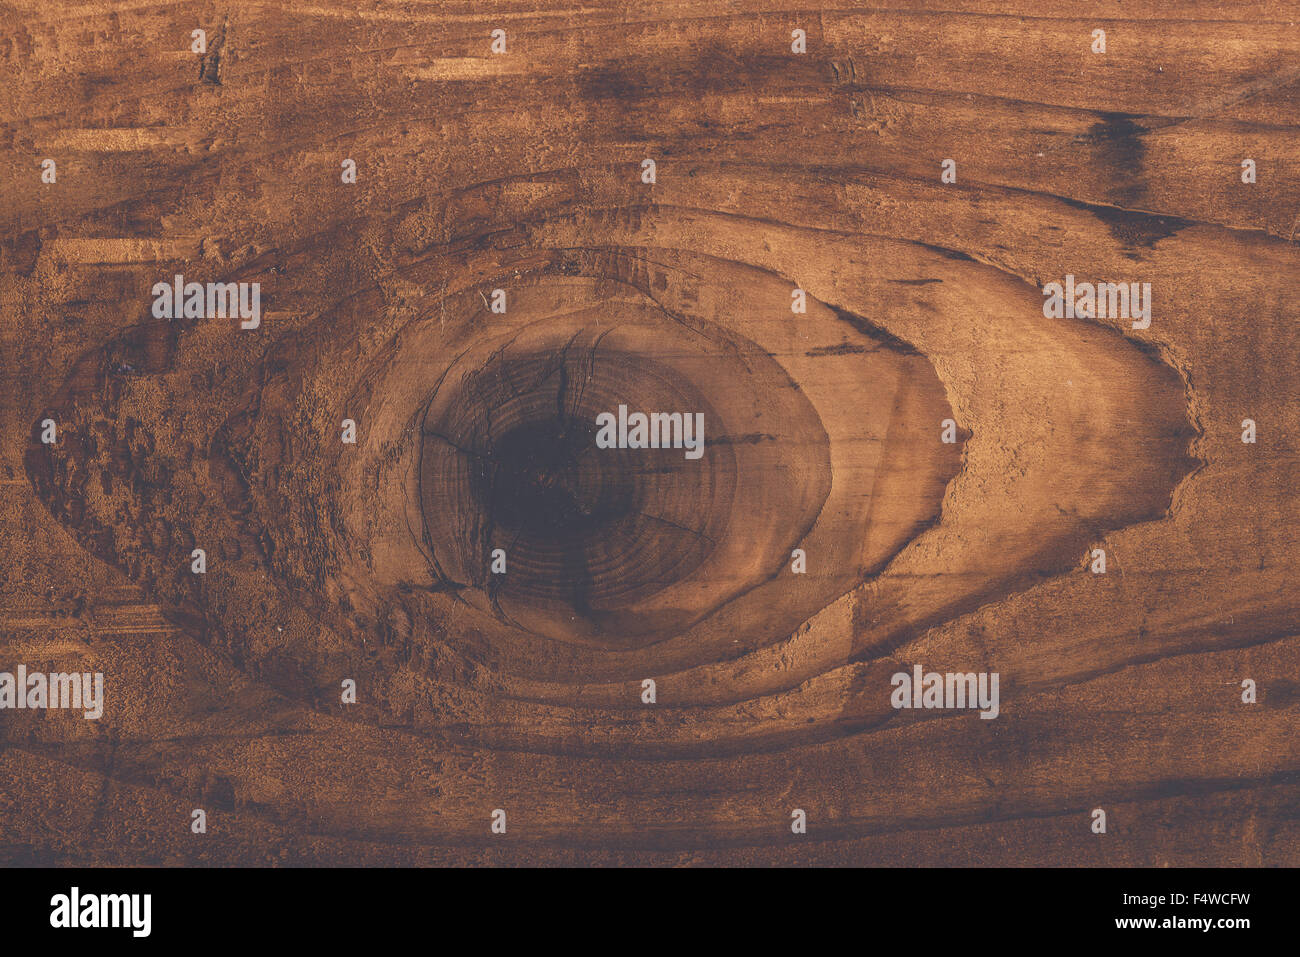 Retro toned rustic wood knot on oak plank texture, used stained wooden board with growth rings Stock Photo